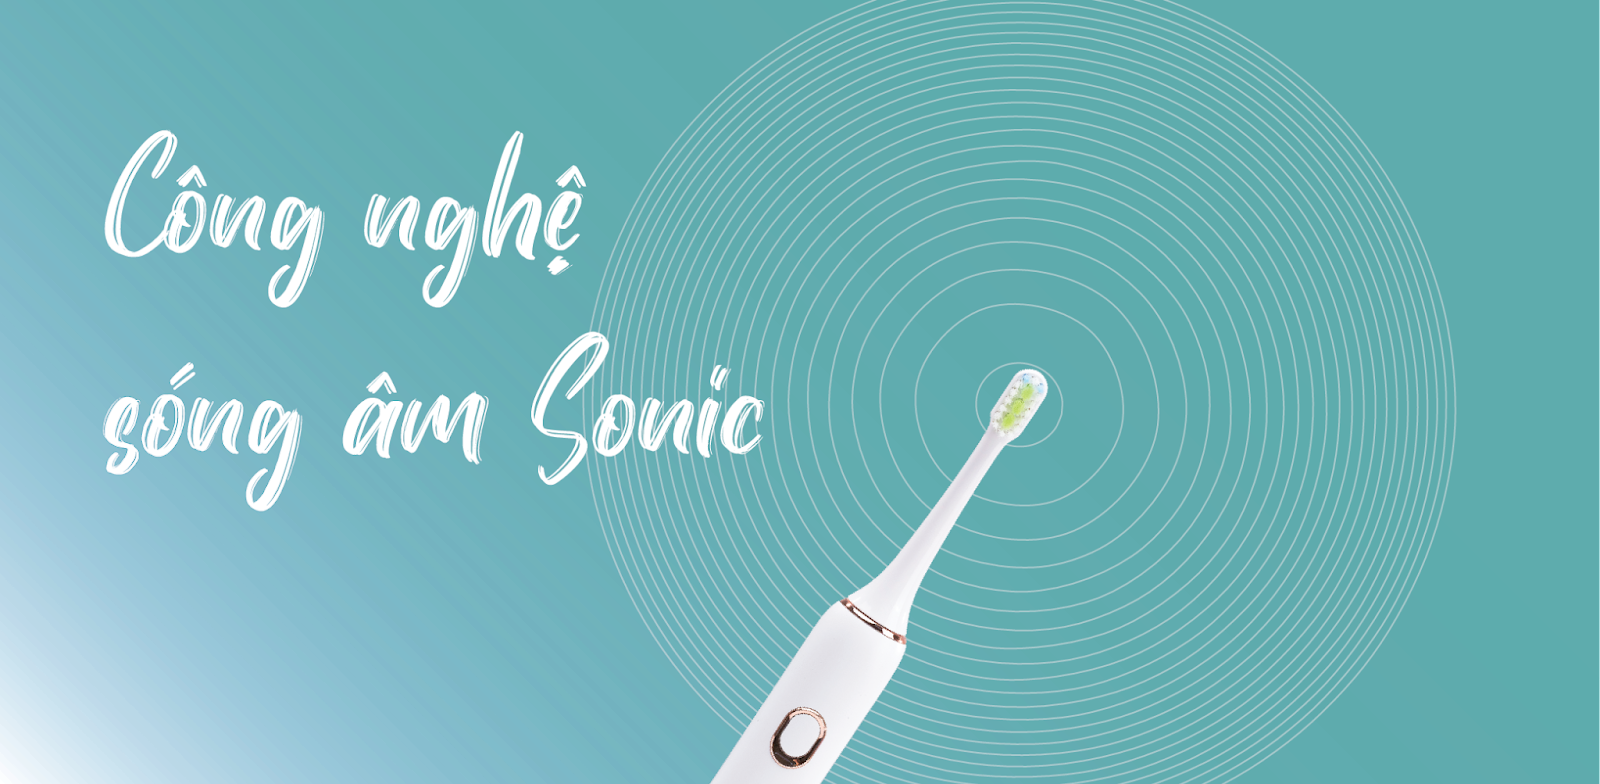 cong-nghe-song-am-sonic